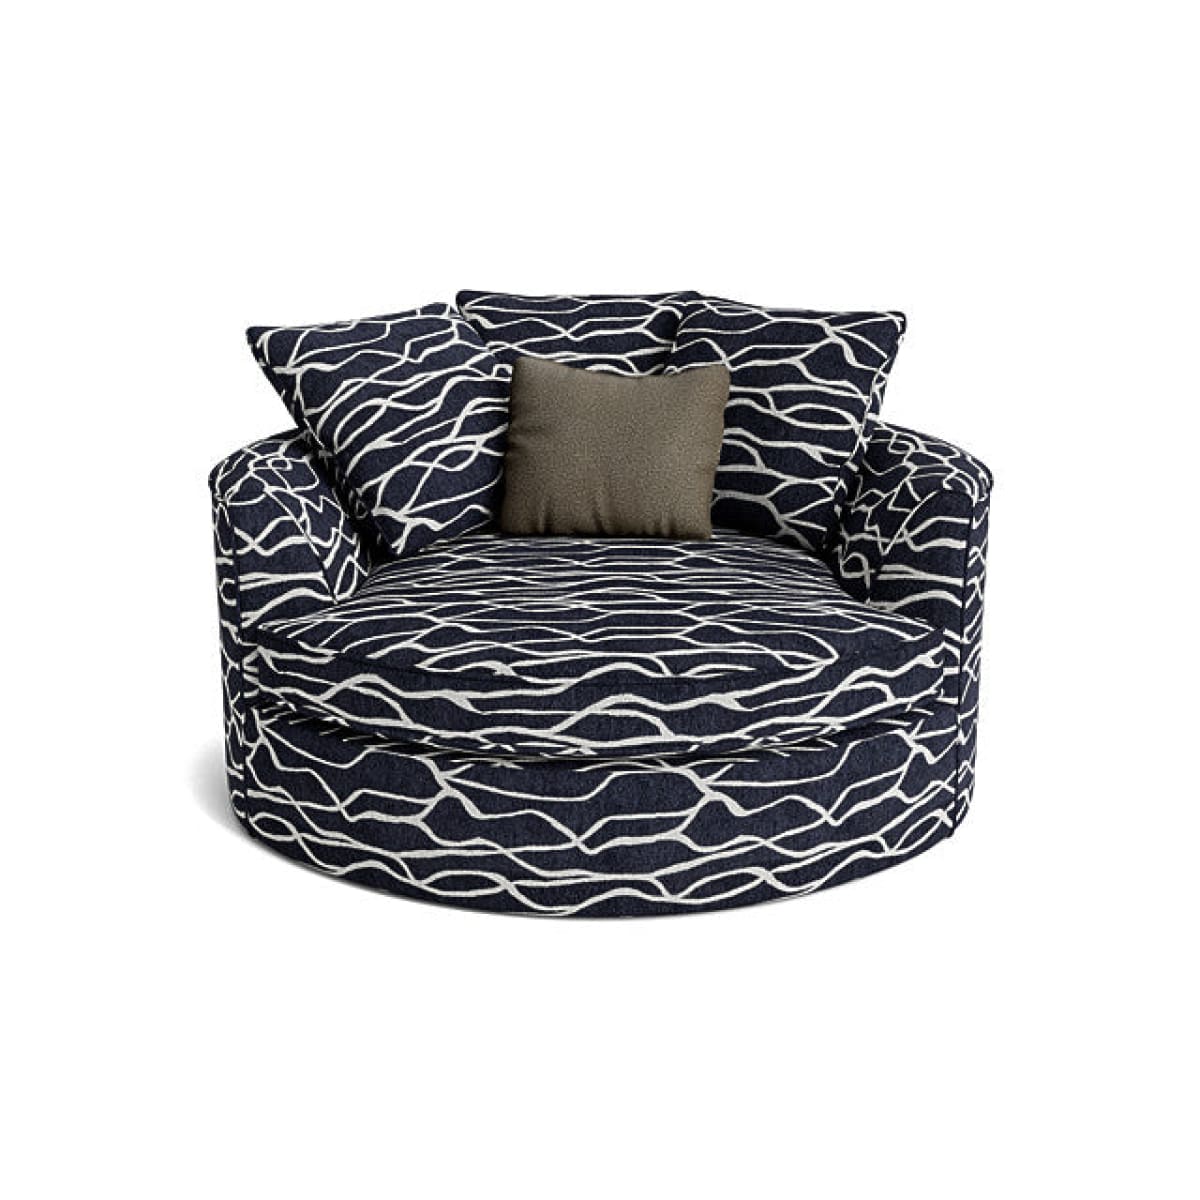 Nest Accent Chair - Revision Navy